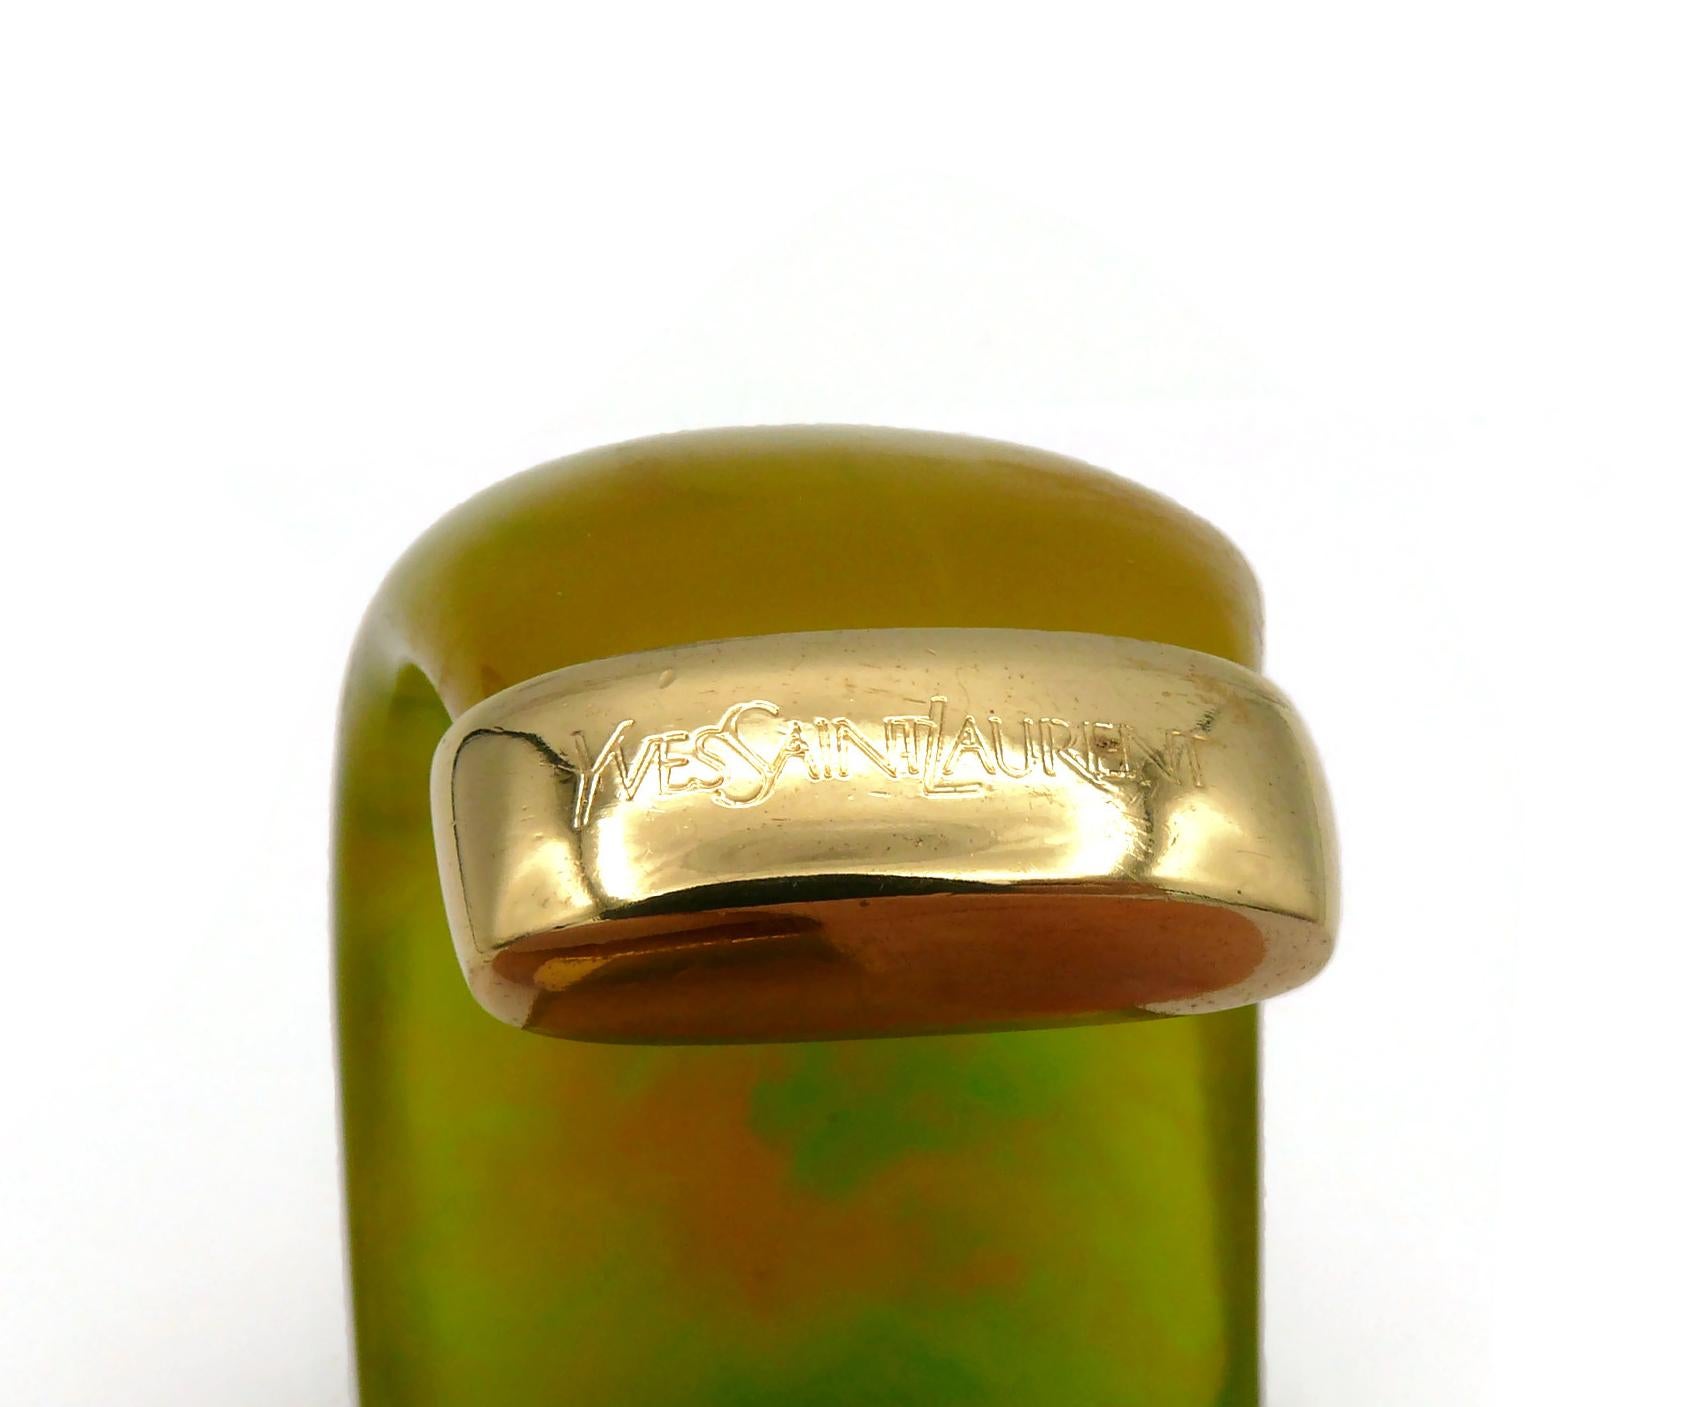 YVES SAINT LAURENT YSL Vintage Yellow Green Marbled Resin Cuff Bracelet For Sale 9